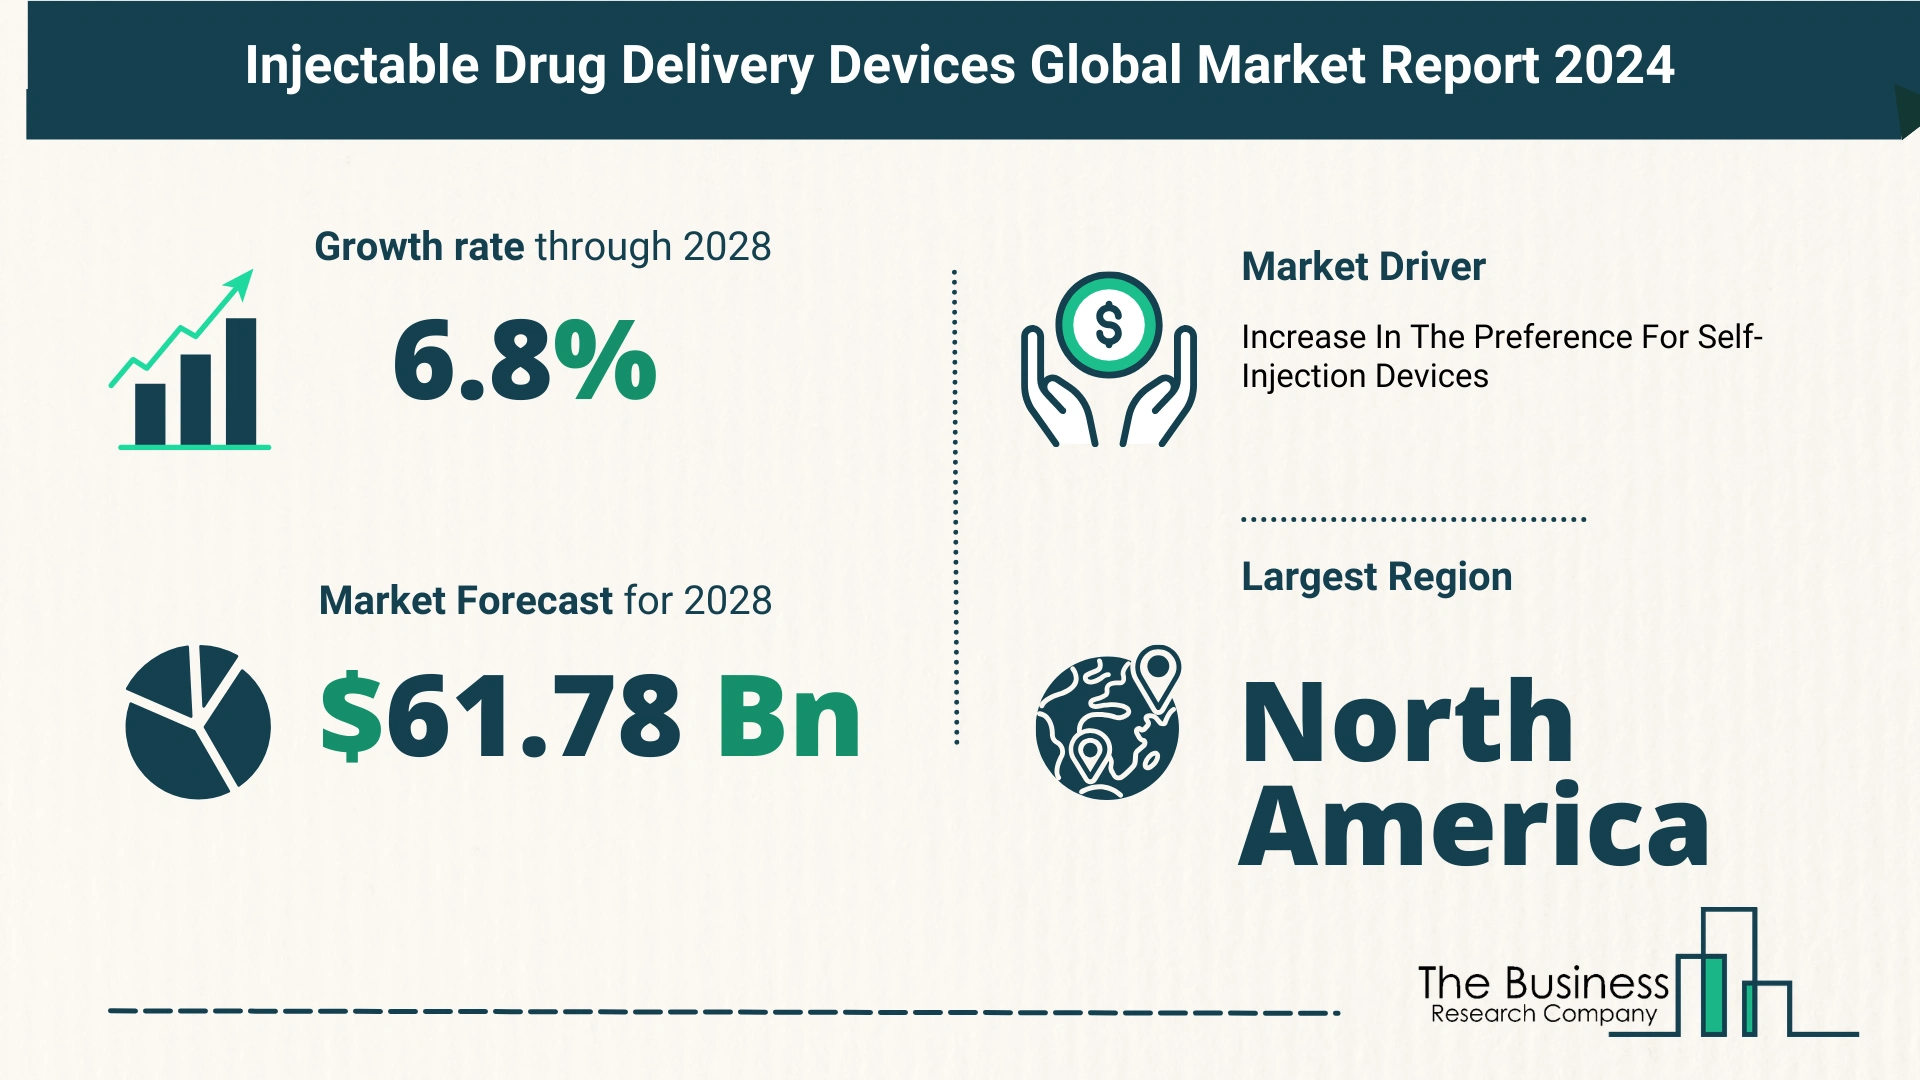 5 Takeaways From The Injectable Drug Delivery Devices Market Overview 2024